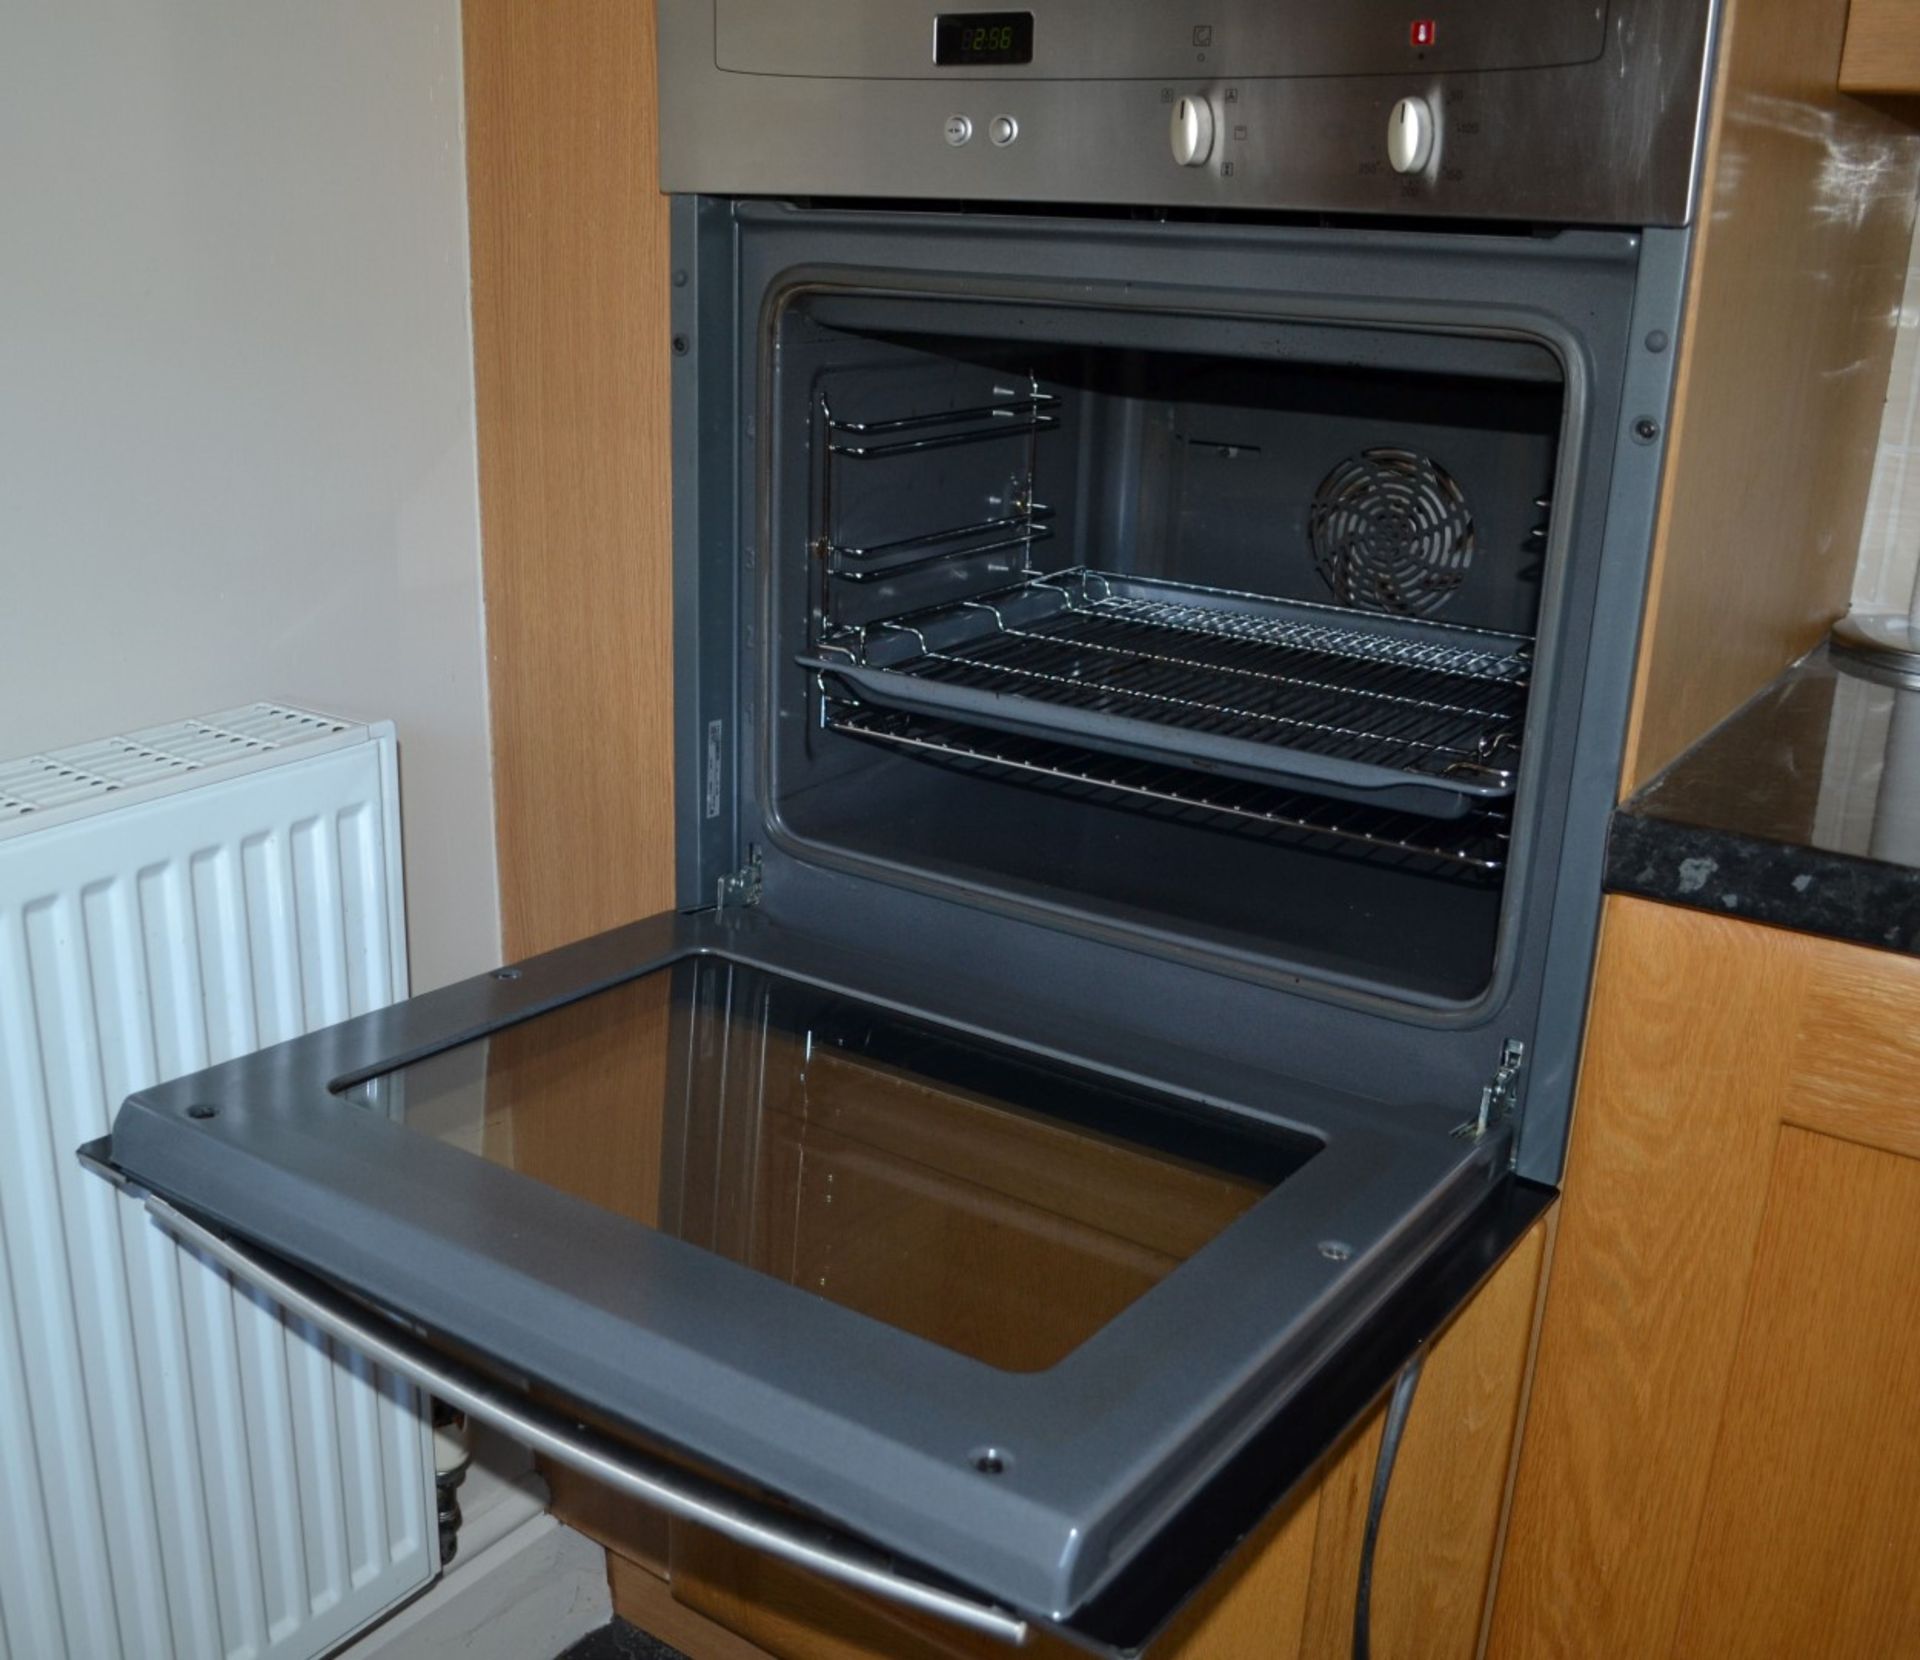 1 x Compact Fitted Kitchen With Neff and Tecnik Appliances - CL322 - Location: Pleasington, BB2 - * - Image 16 of 35